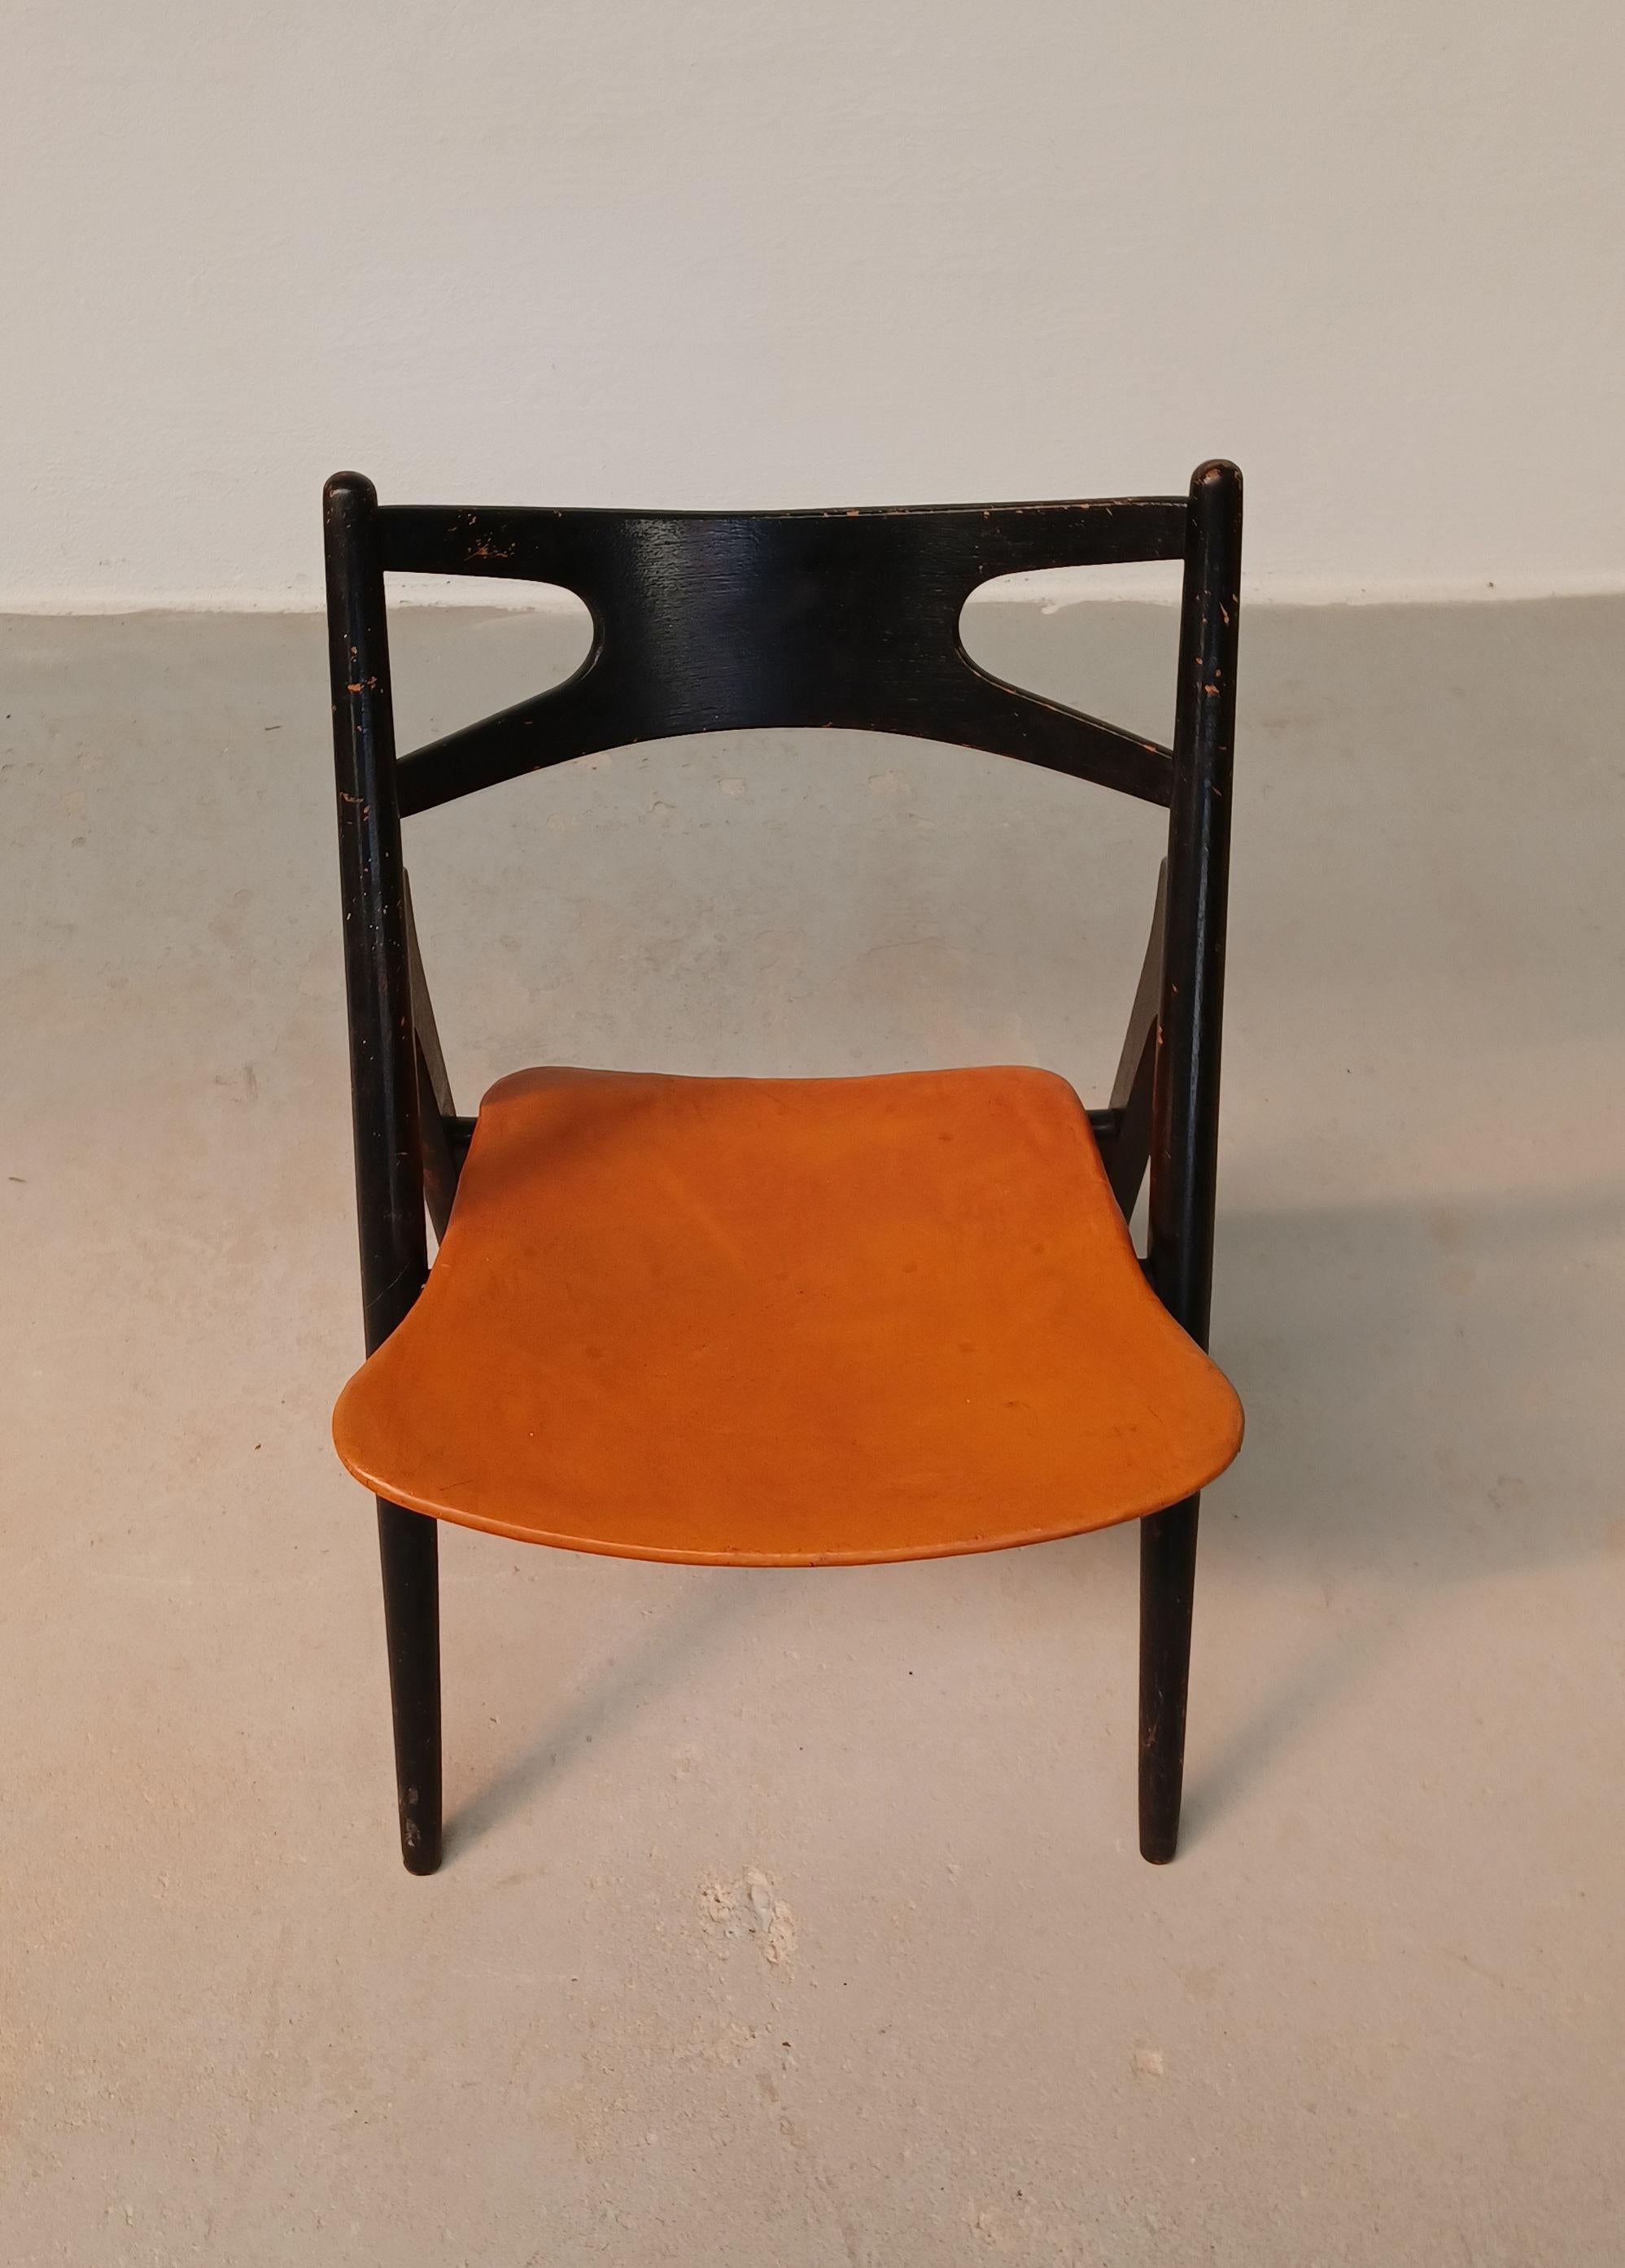 1950´s Patinated Hans Wegner Sawbuck Chair with Original Leather by Carl Hansen & Søn

The iconic 